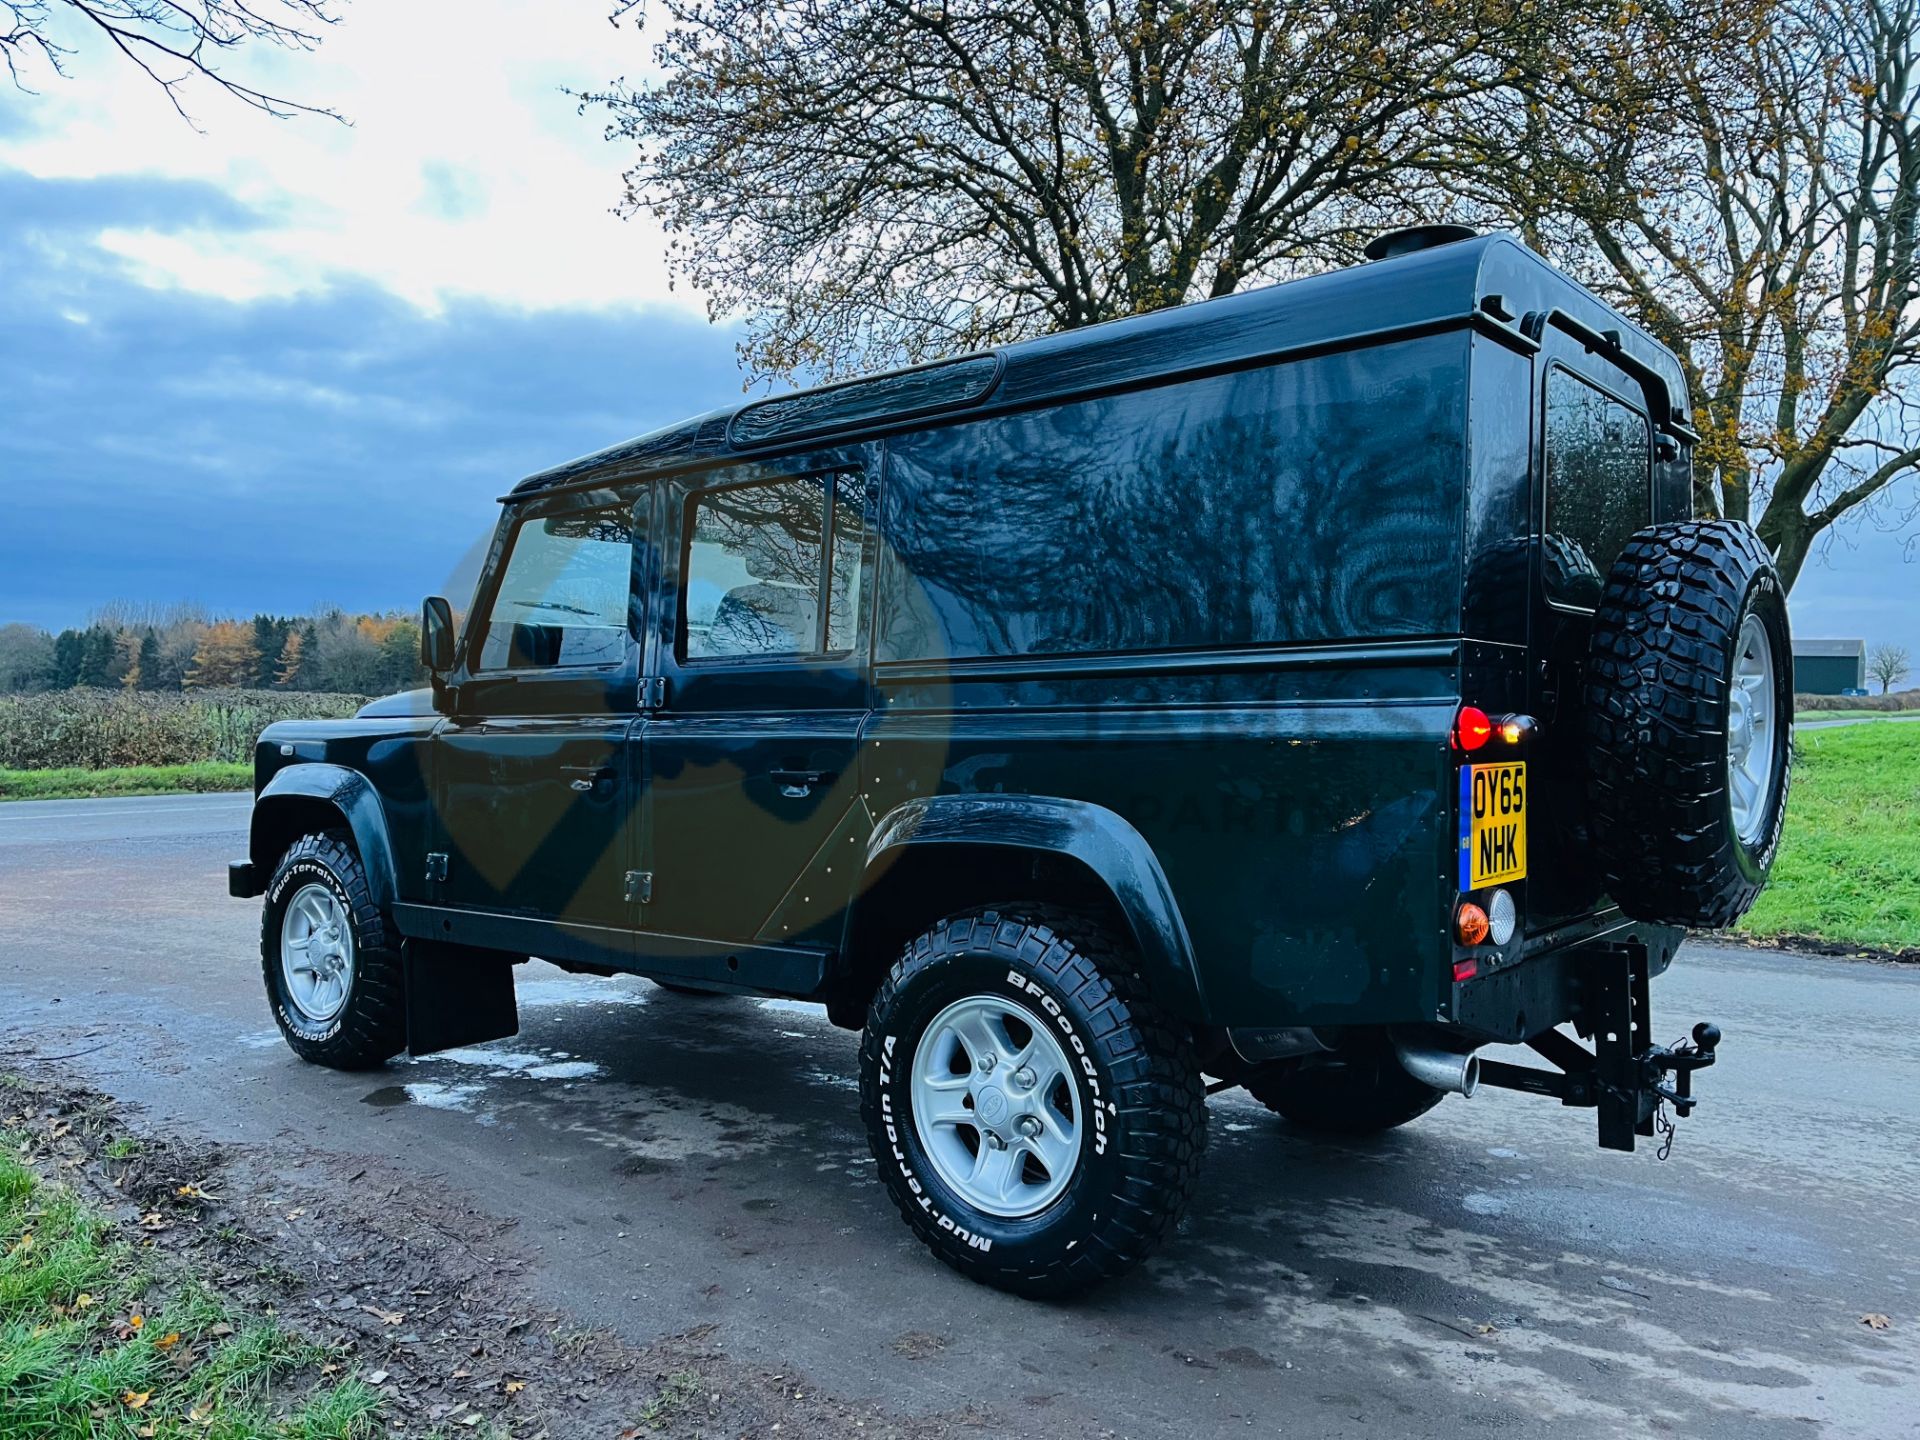 (ON SALE) LAND ROVER DEFENDER 110 2.2TDCI "COUNTY-UTILITY WAGON" (2016 MODEL) 37000 MILES LR HISTORY - Image 9 of 24